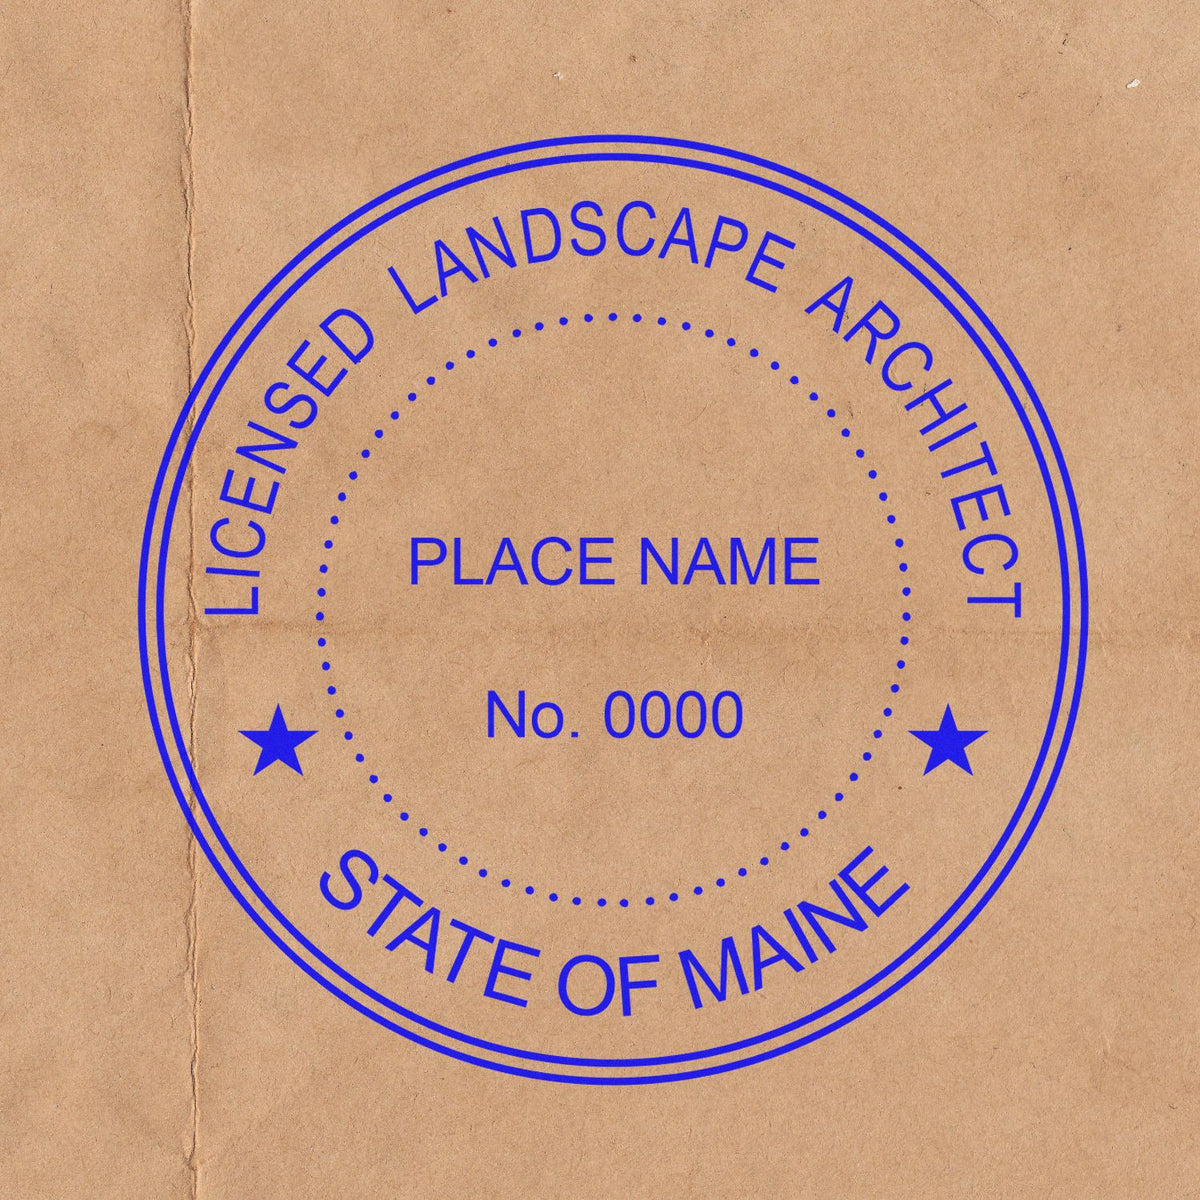 The Slim Pre-Inked Maine Landscape Architect Seal Stamp stamp impression comes to life with a crisp, detailed photo on paper - showcasing true professional quality.